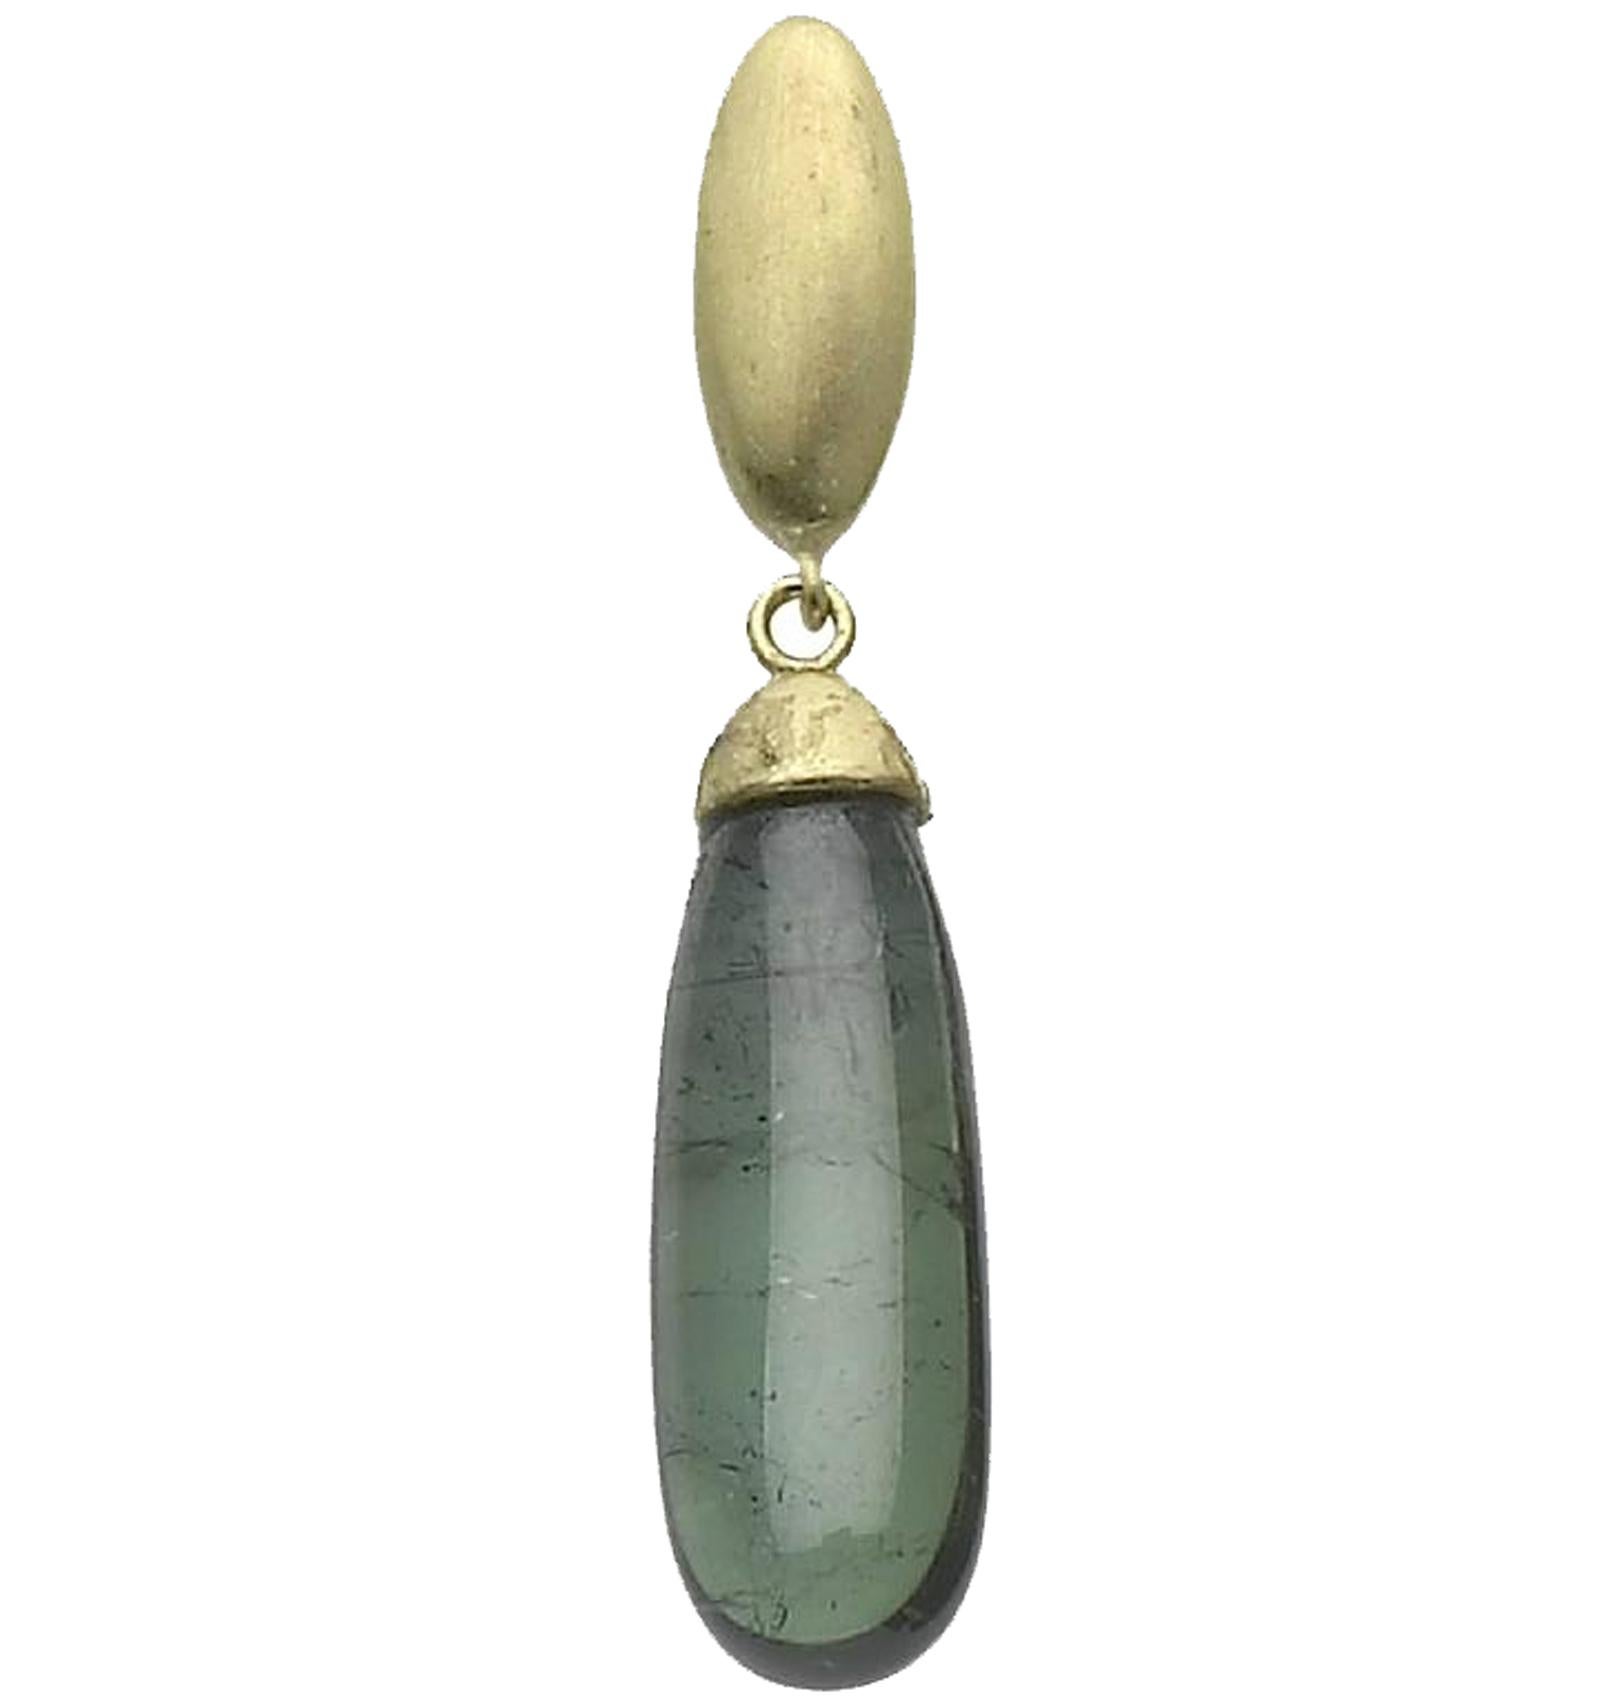 Top of 18kt yellow gold hand finished pebble earrings with smooth cabochon green Tourmaline drops